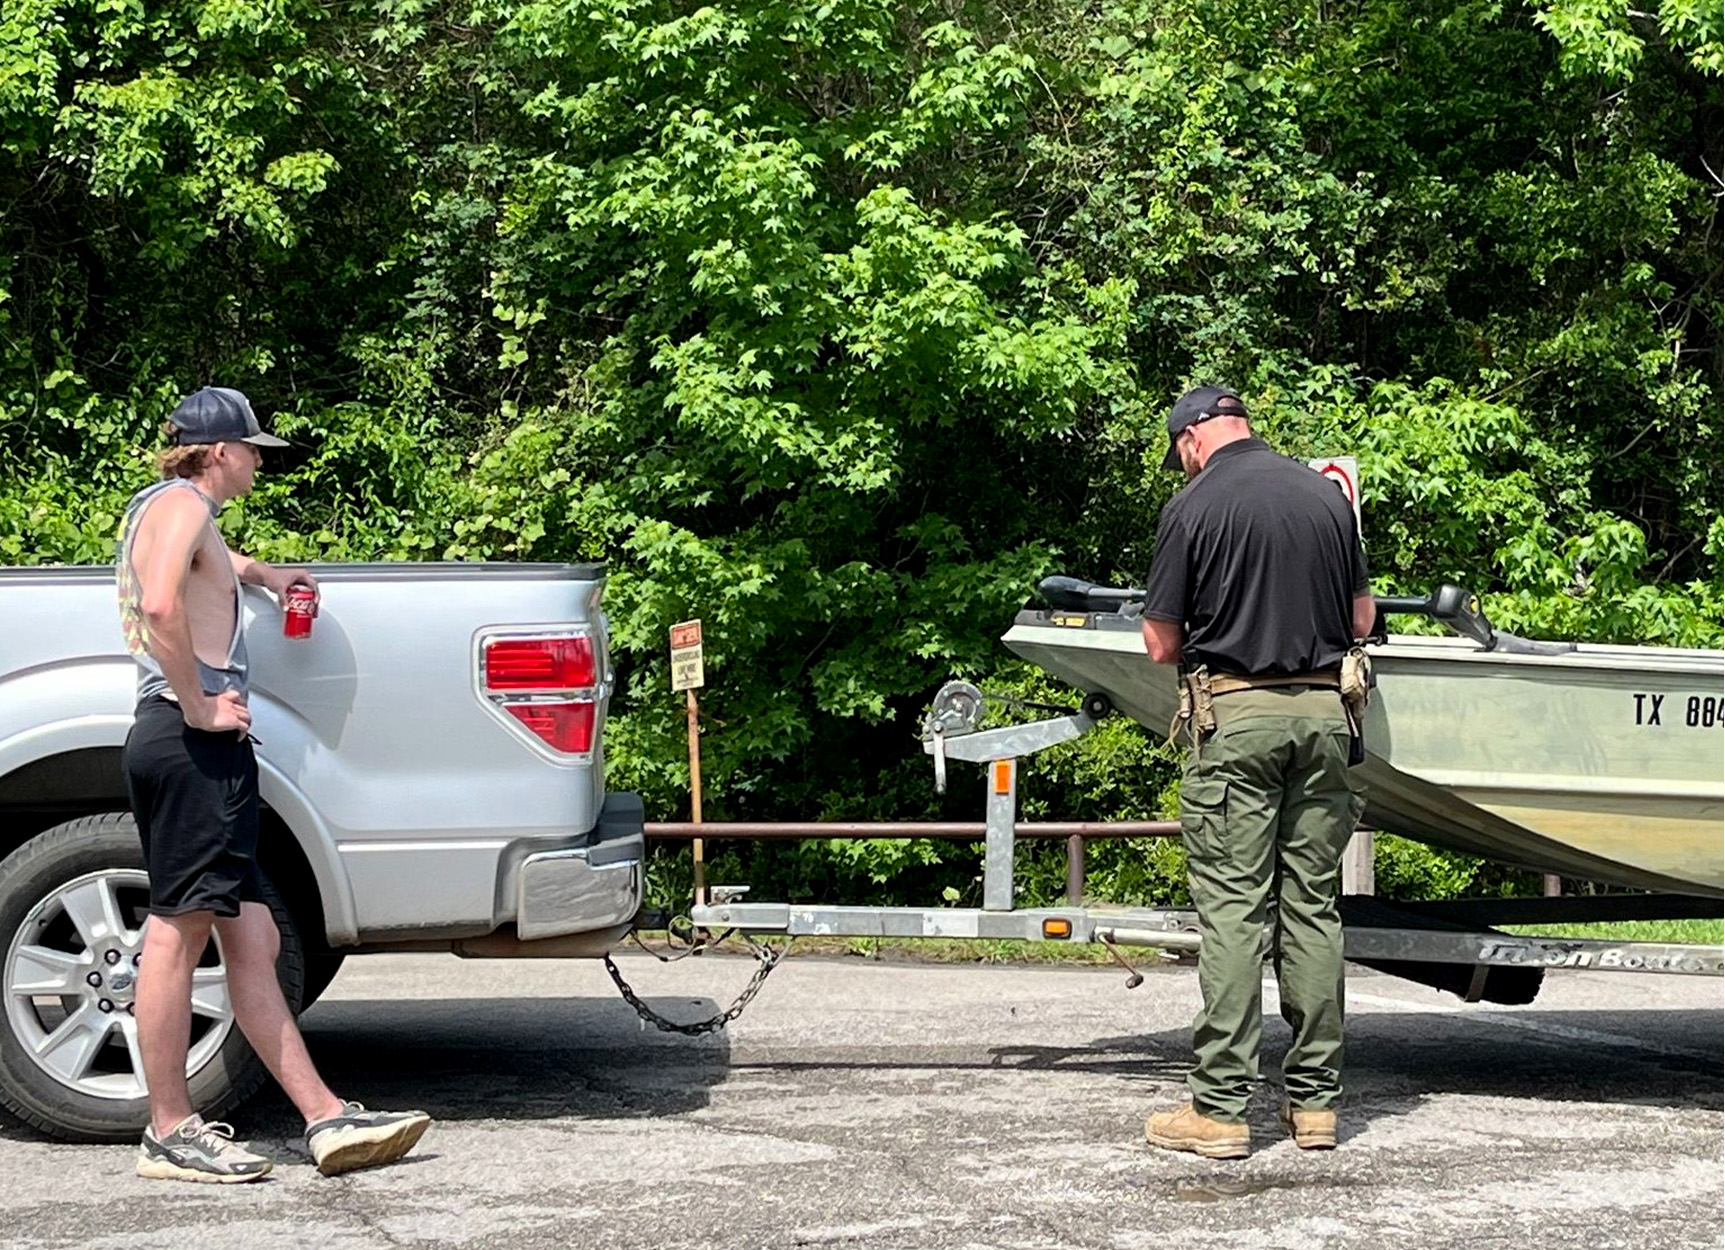 A Texas game warden inspects a boat.